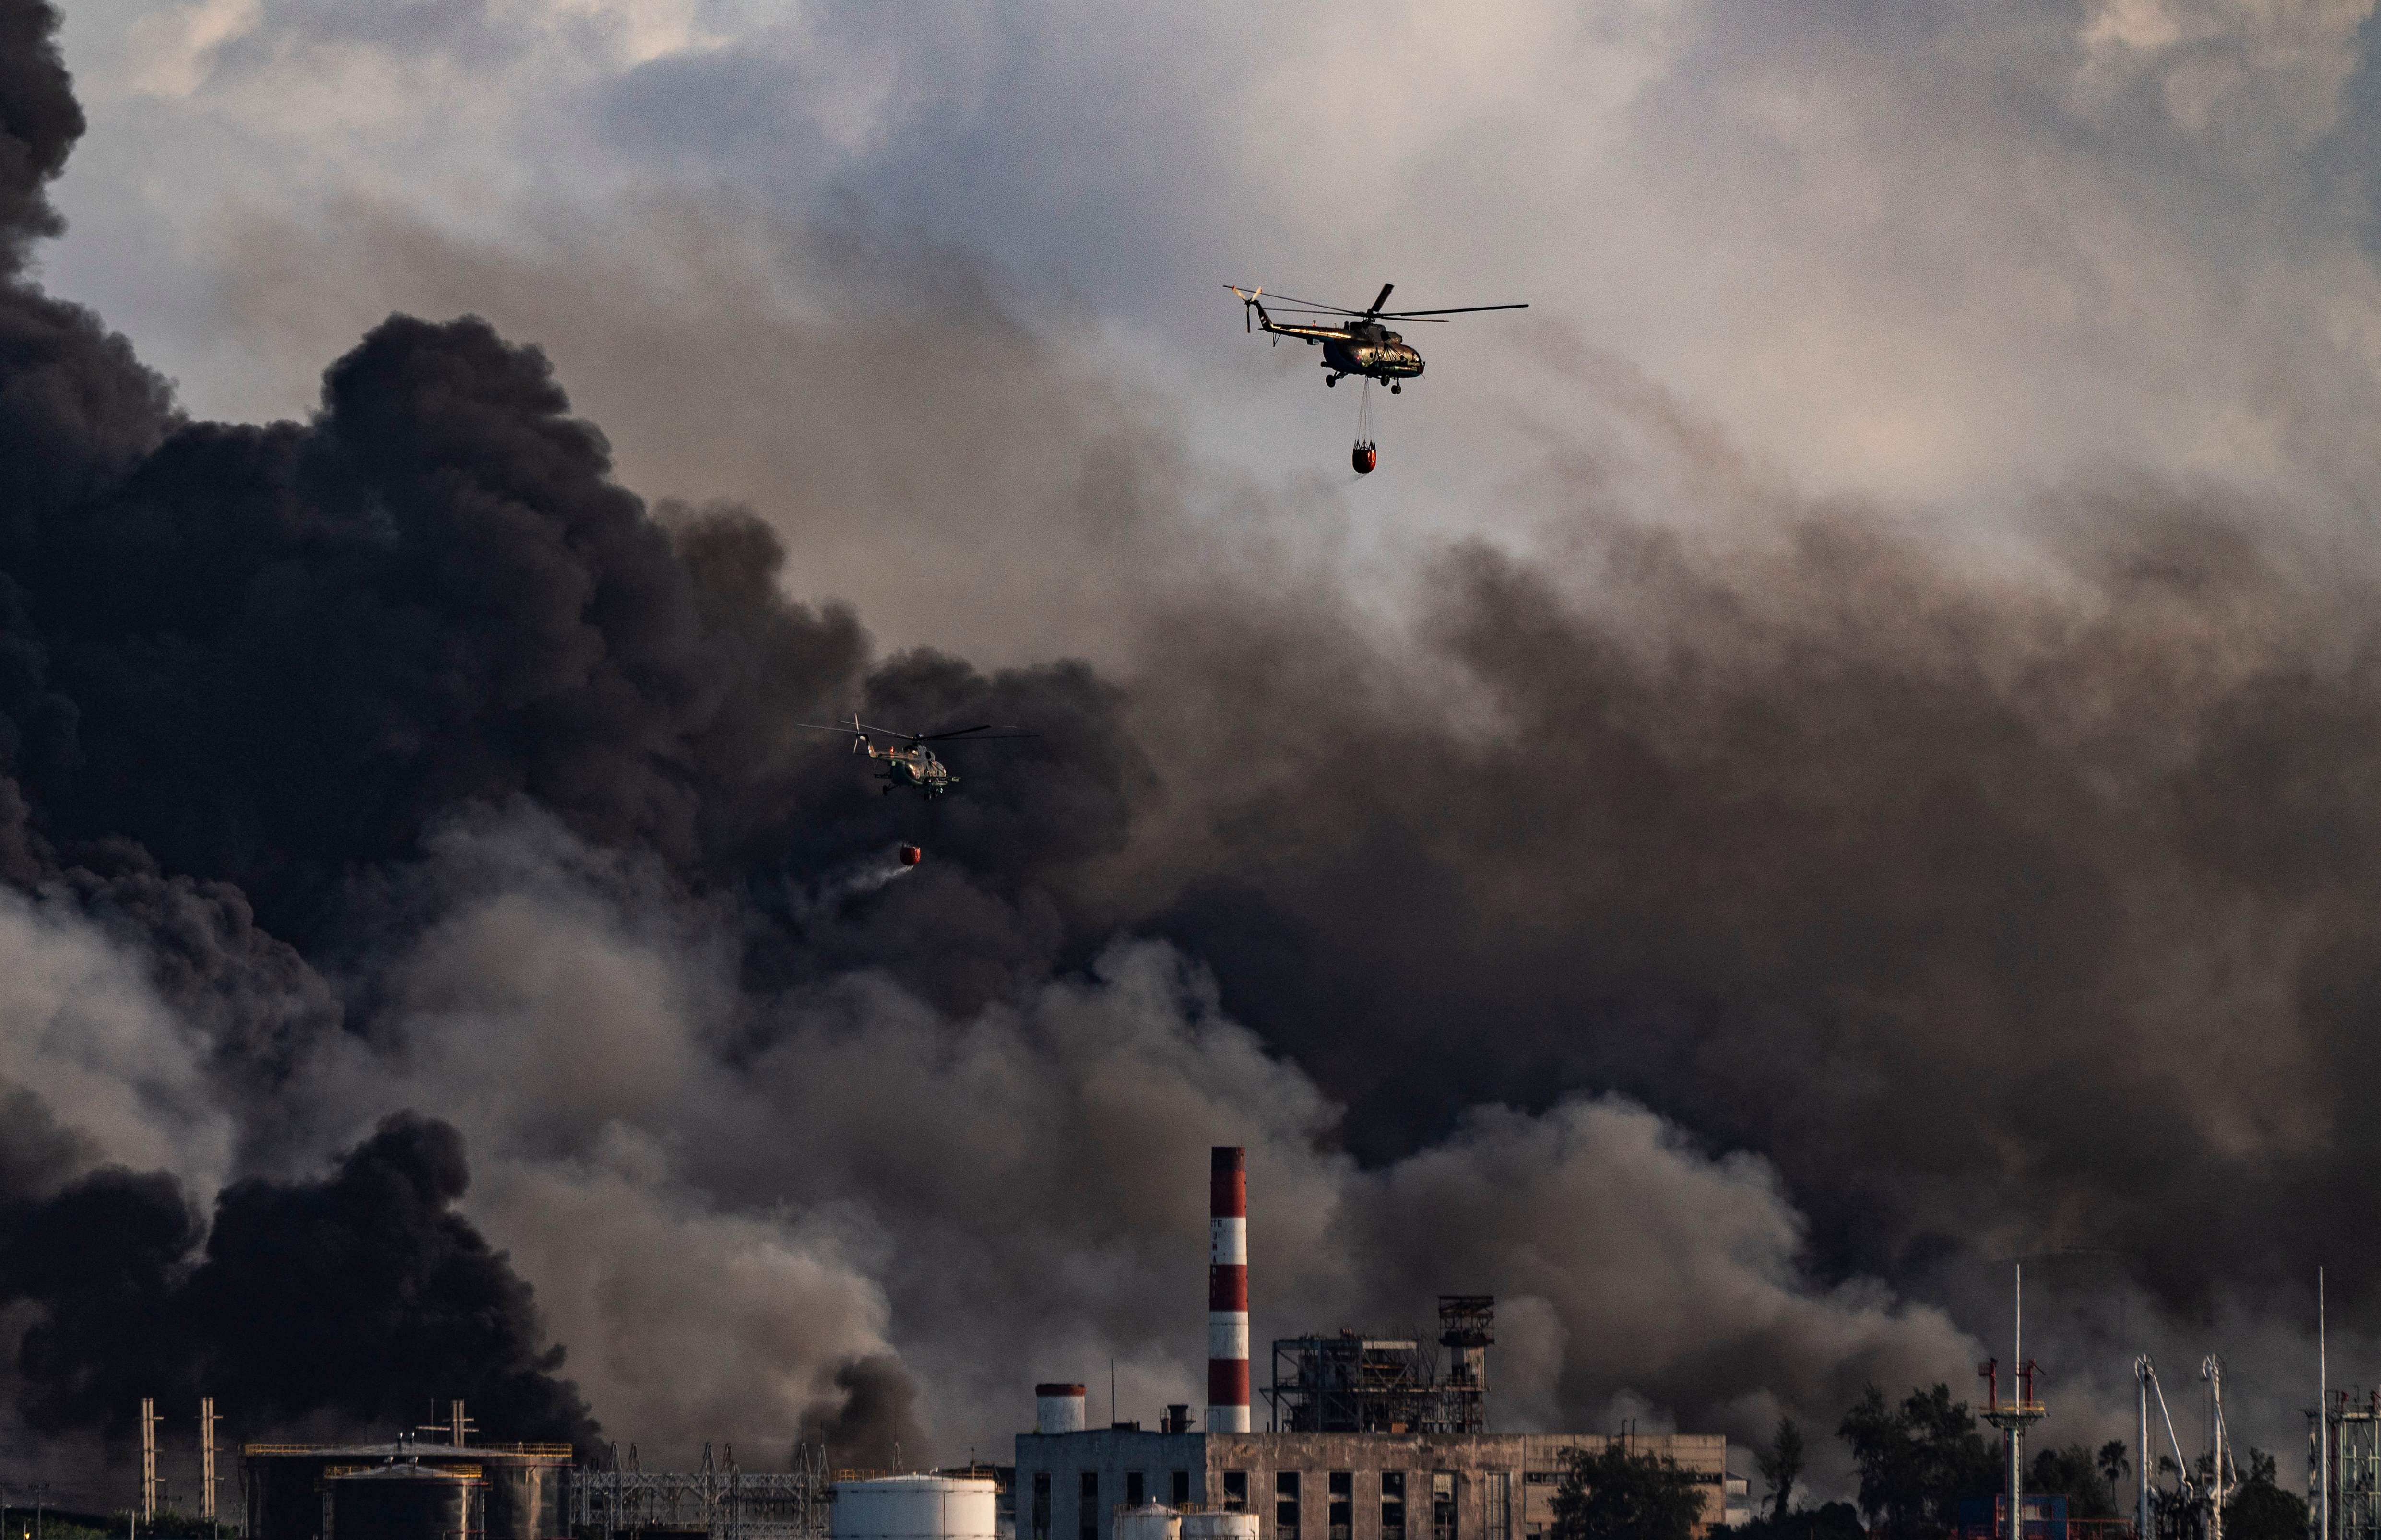 A firefighter helicopter drops water on a massive fire at a fuel depot sparked by a lightning strike in Matanzas, Cuba. Credit: AFP Photo